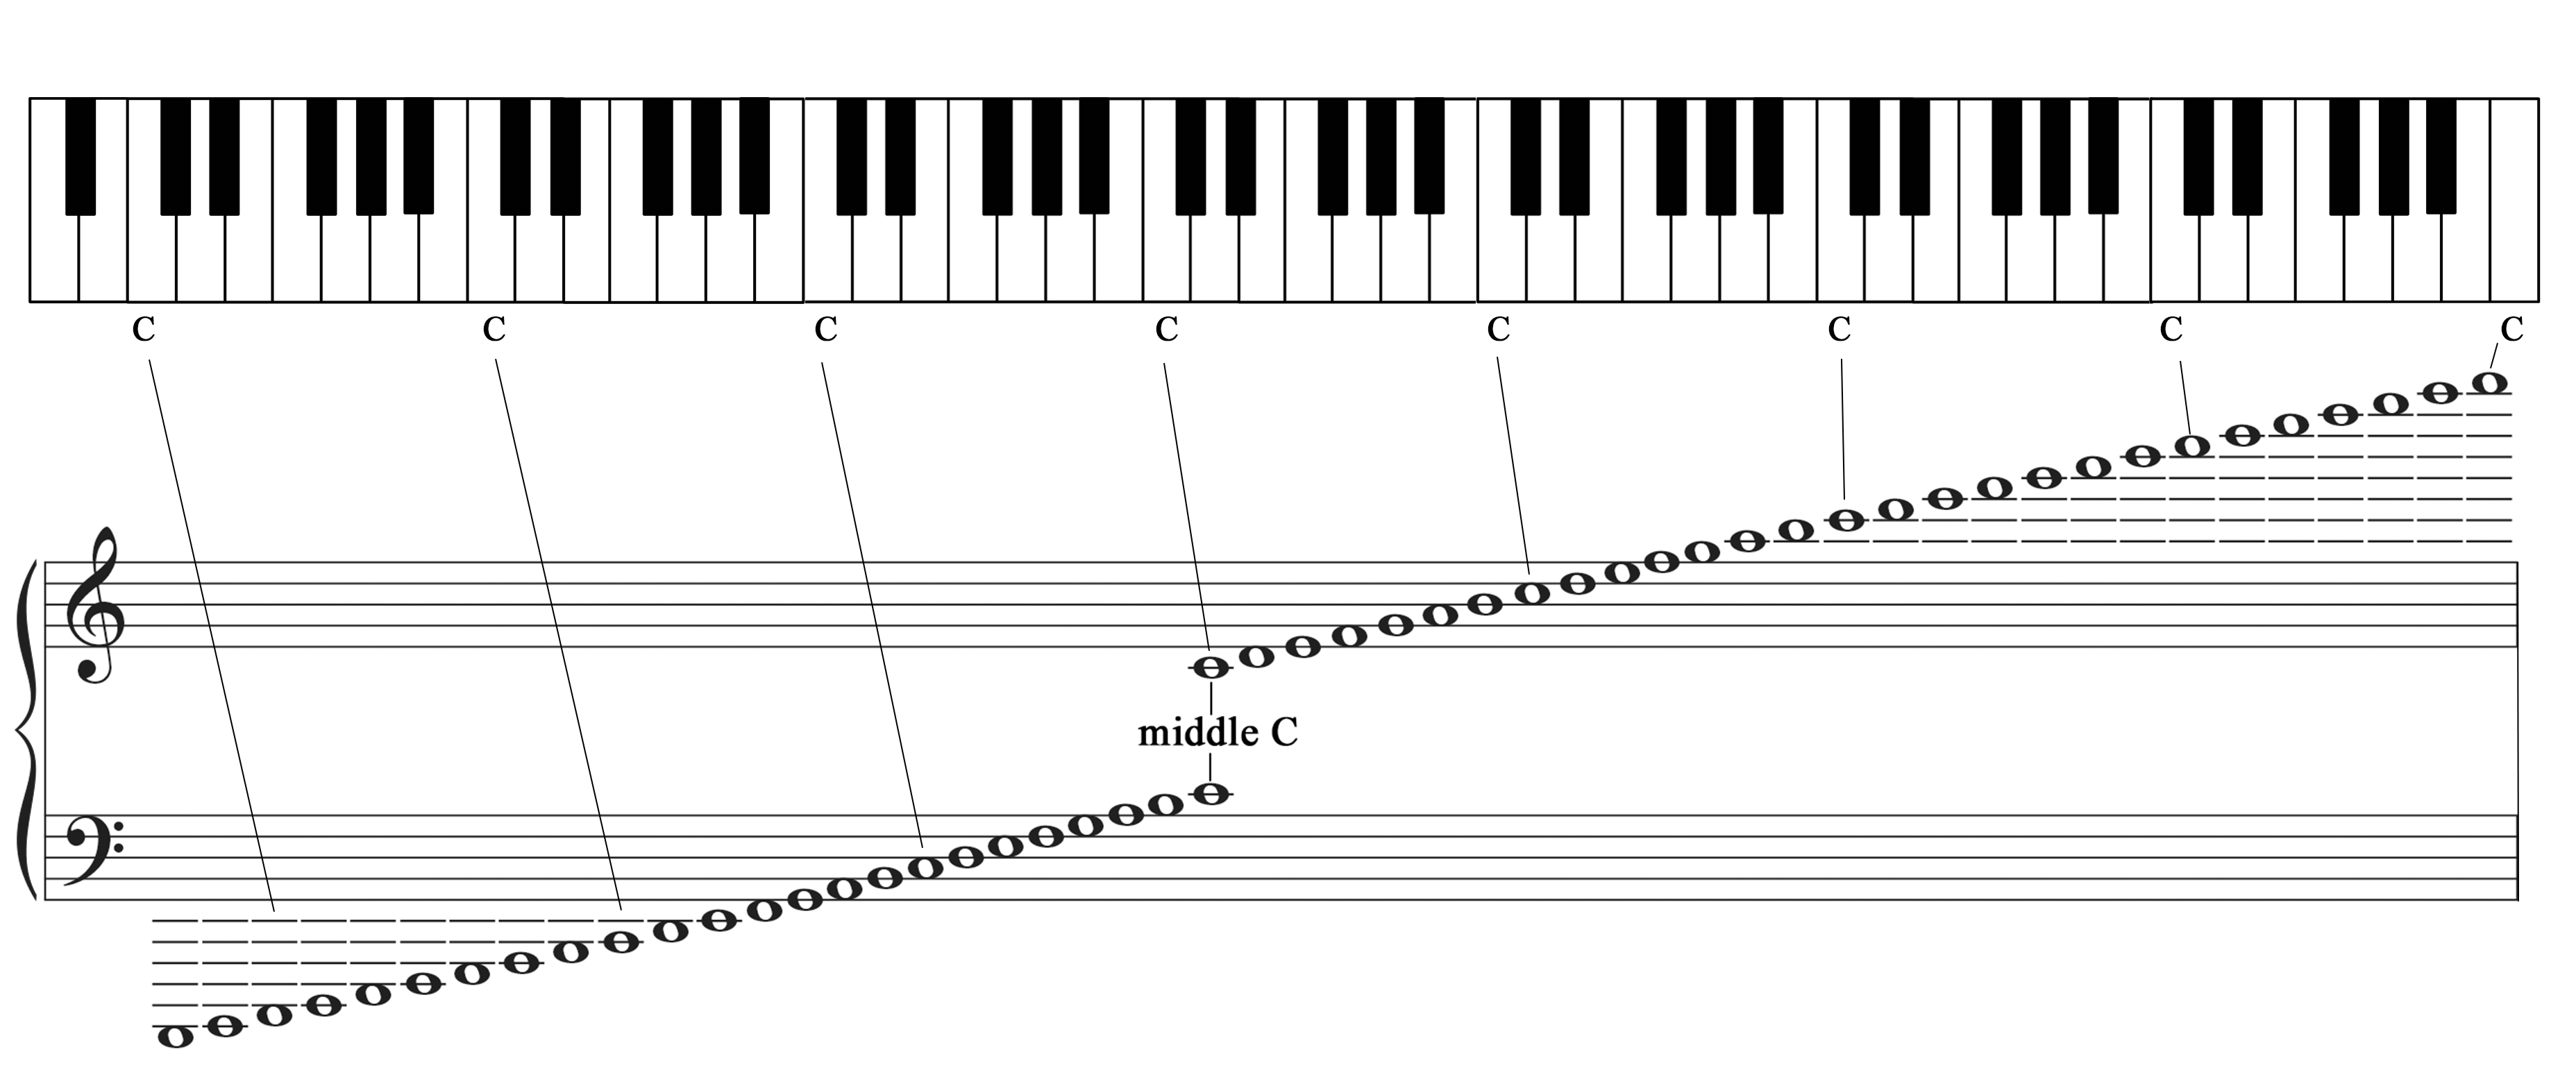 Full keyboard with all eight Cs labeled and their corresponding placements on the grand staff shown.